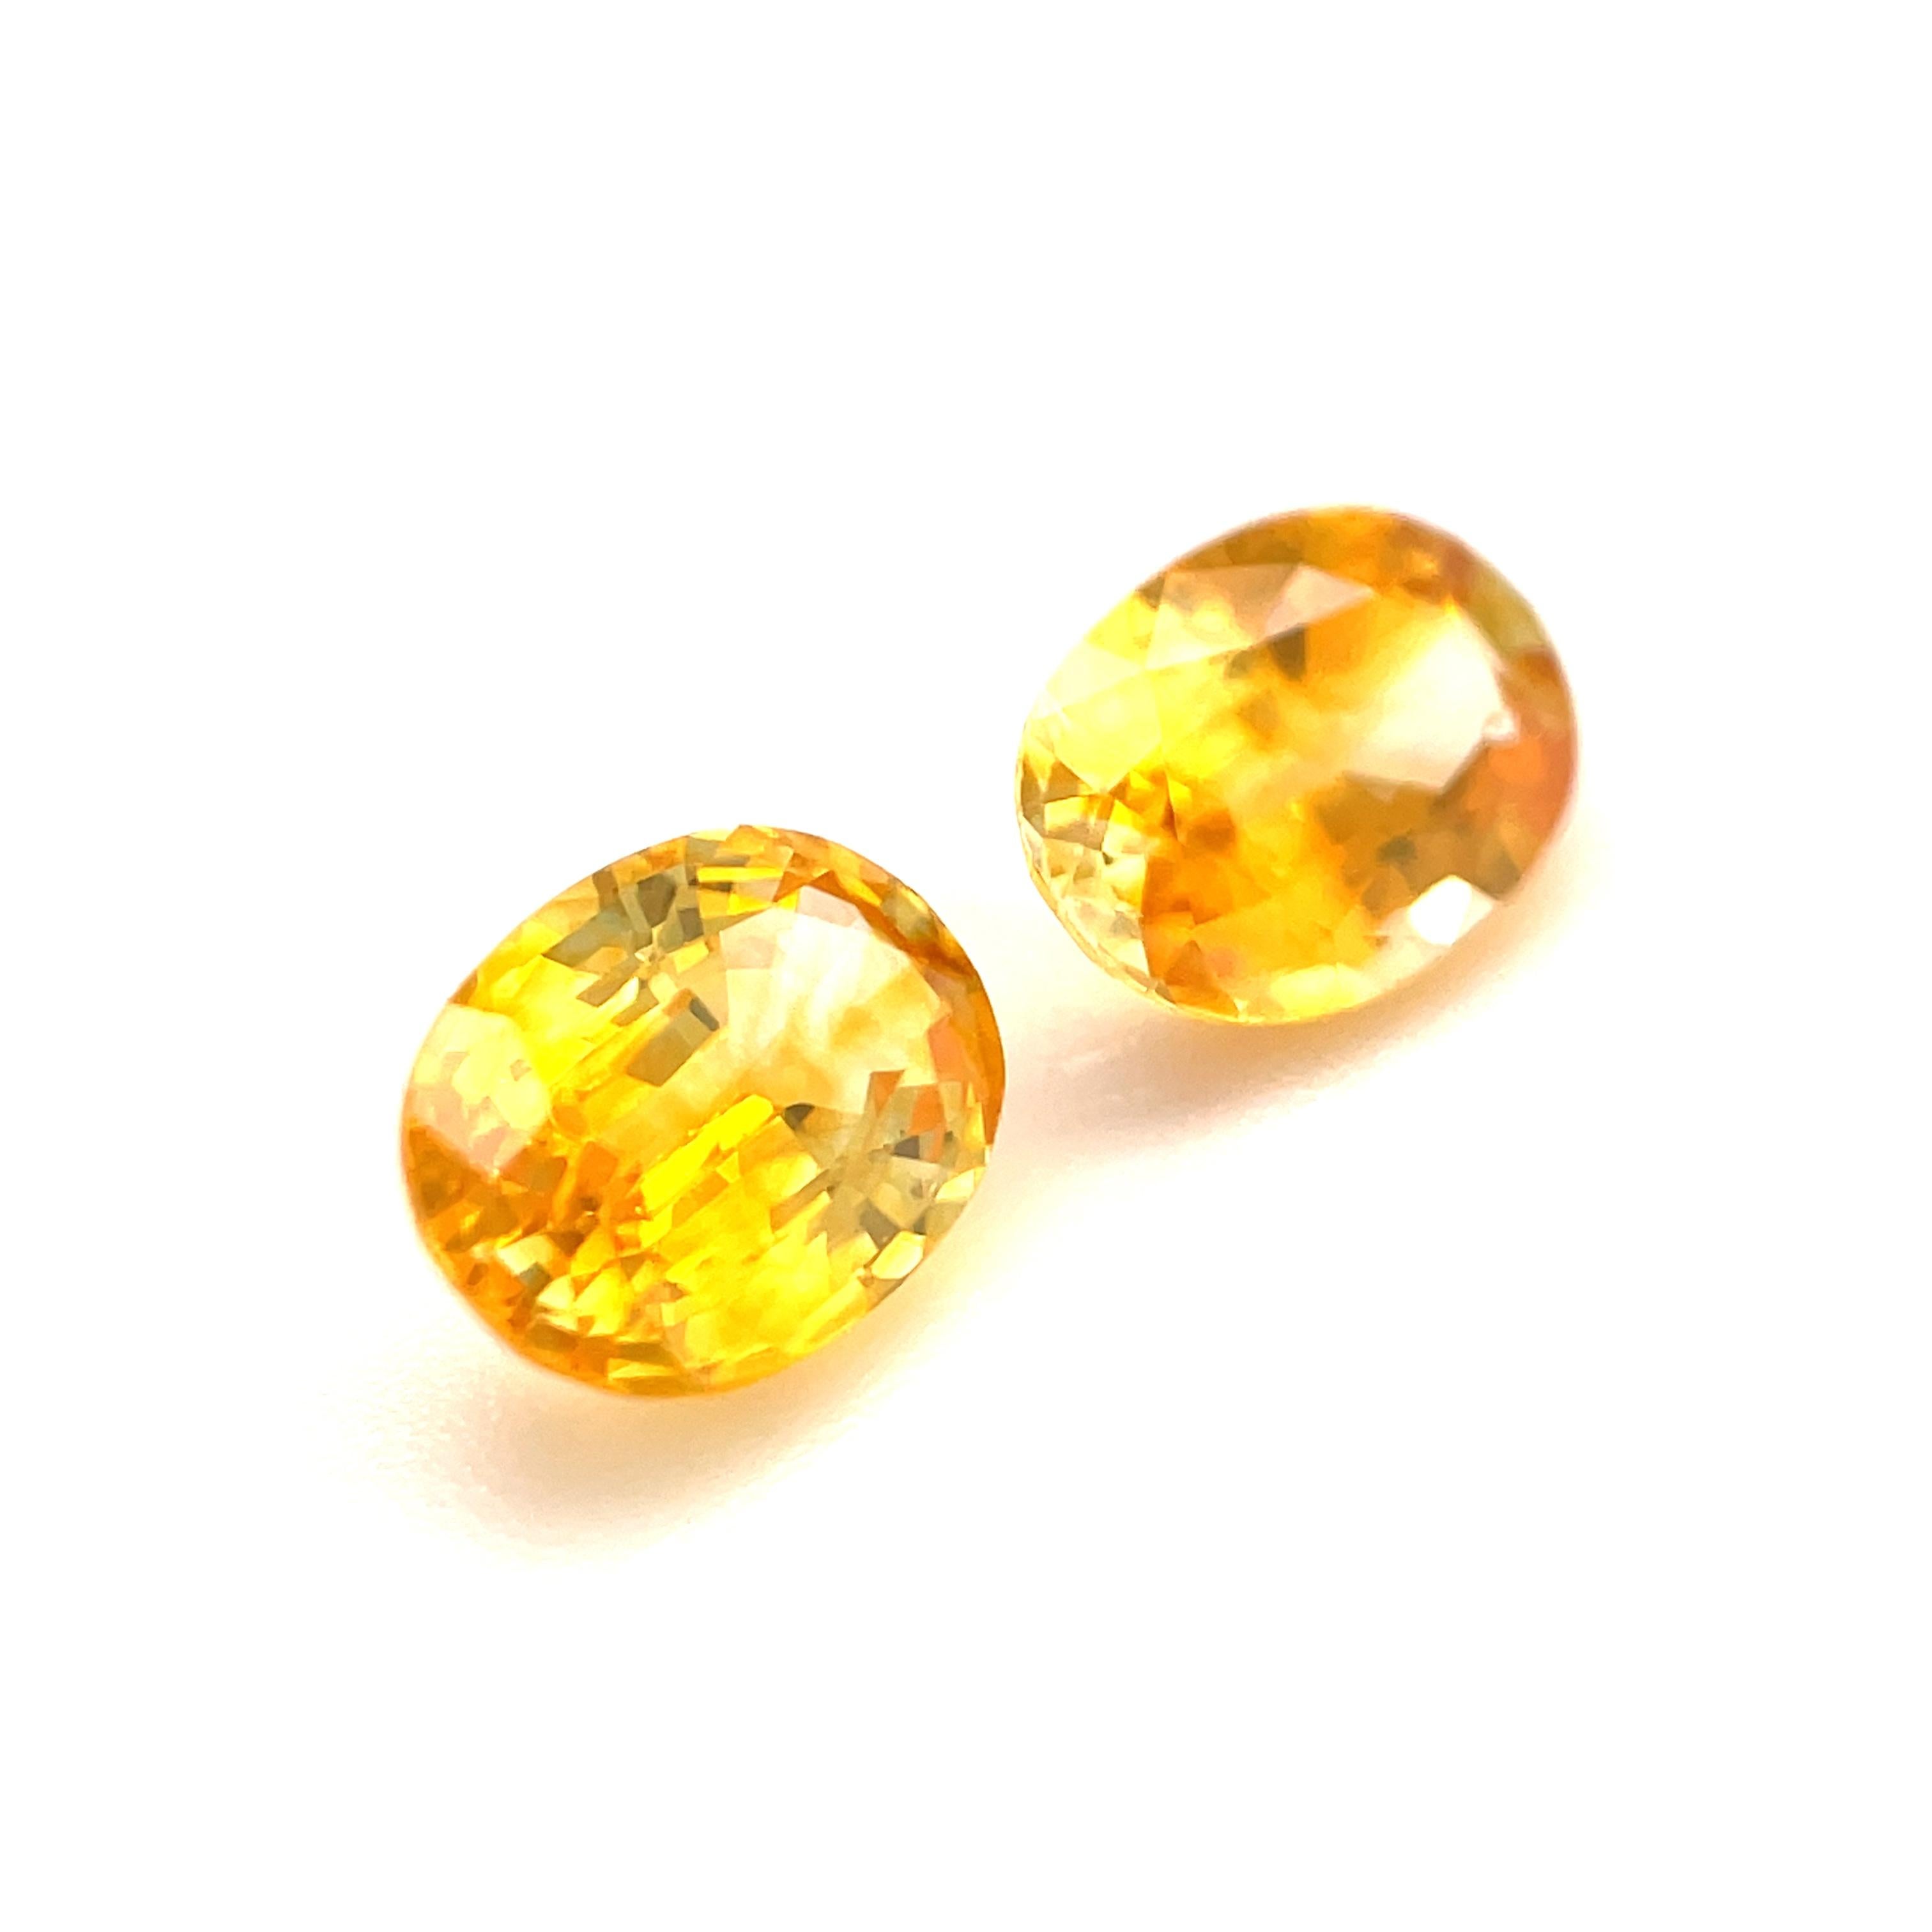 Artisan 1.92 Carat Total Oval Yellow Sapphire Pair for Earrings, Loose Gemstones For Sale